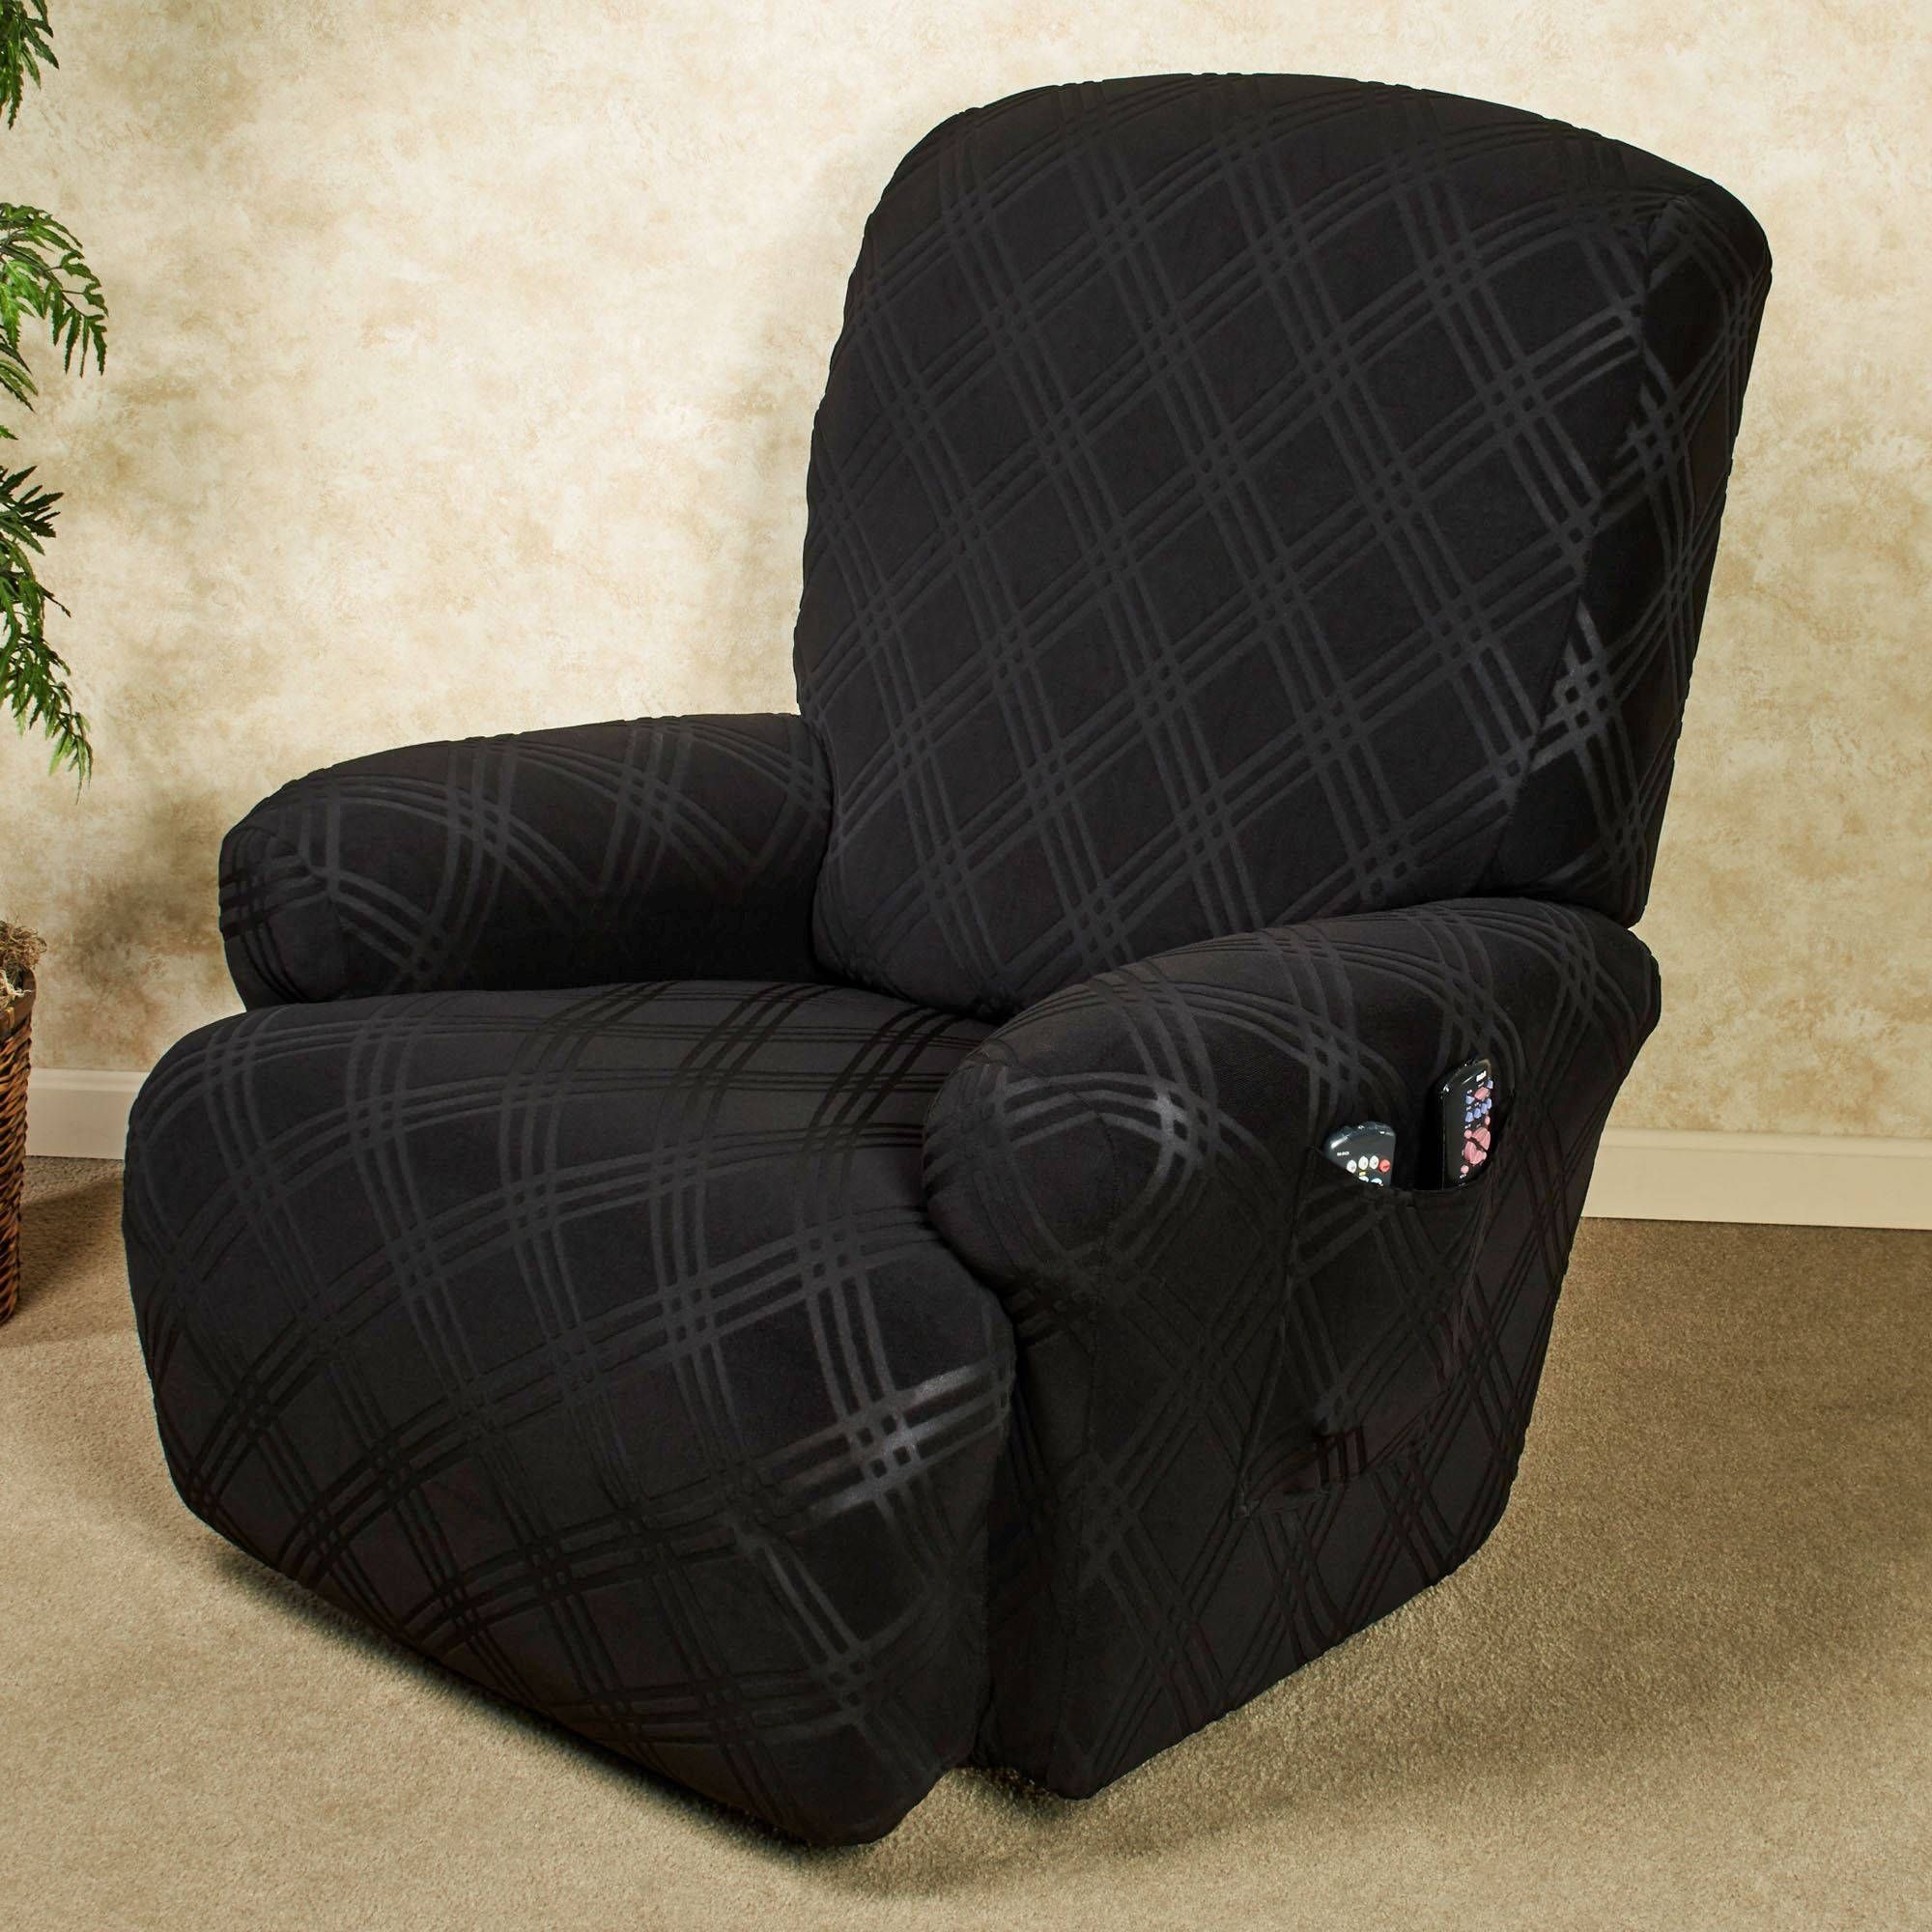 Double Diamond Stretch Recliner Slipcovers Throughout Stretch Covers For Recliners (View 2 of 15)